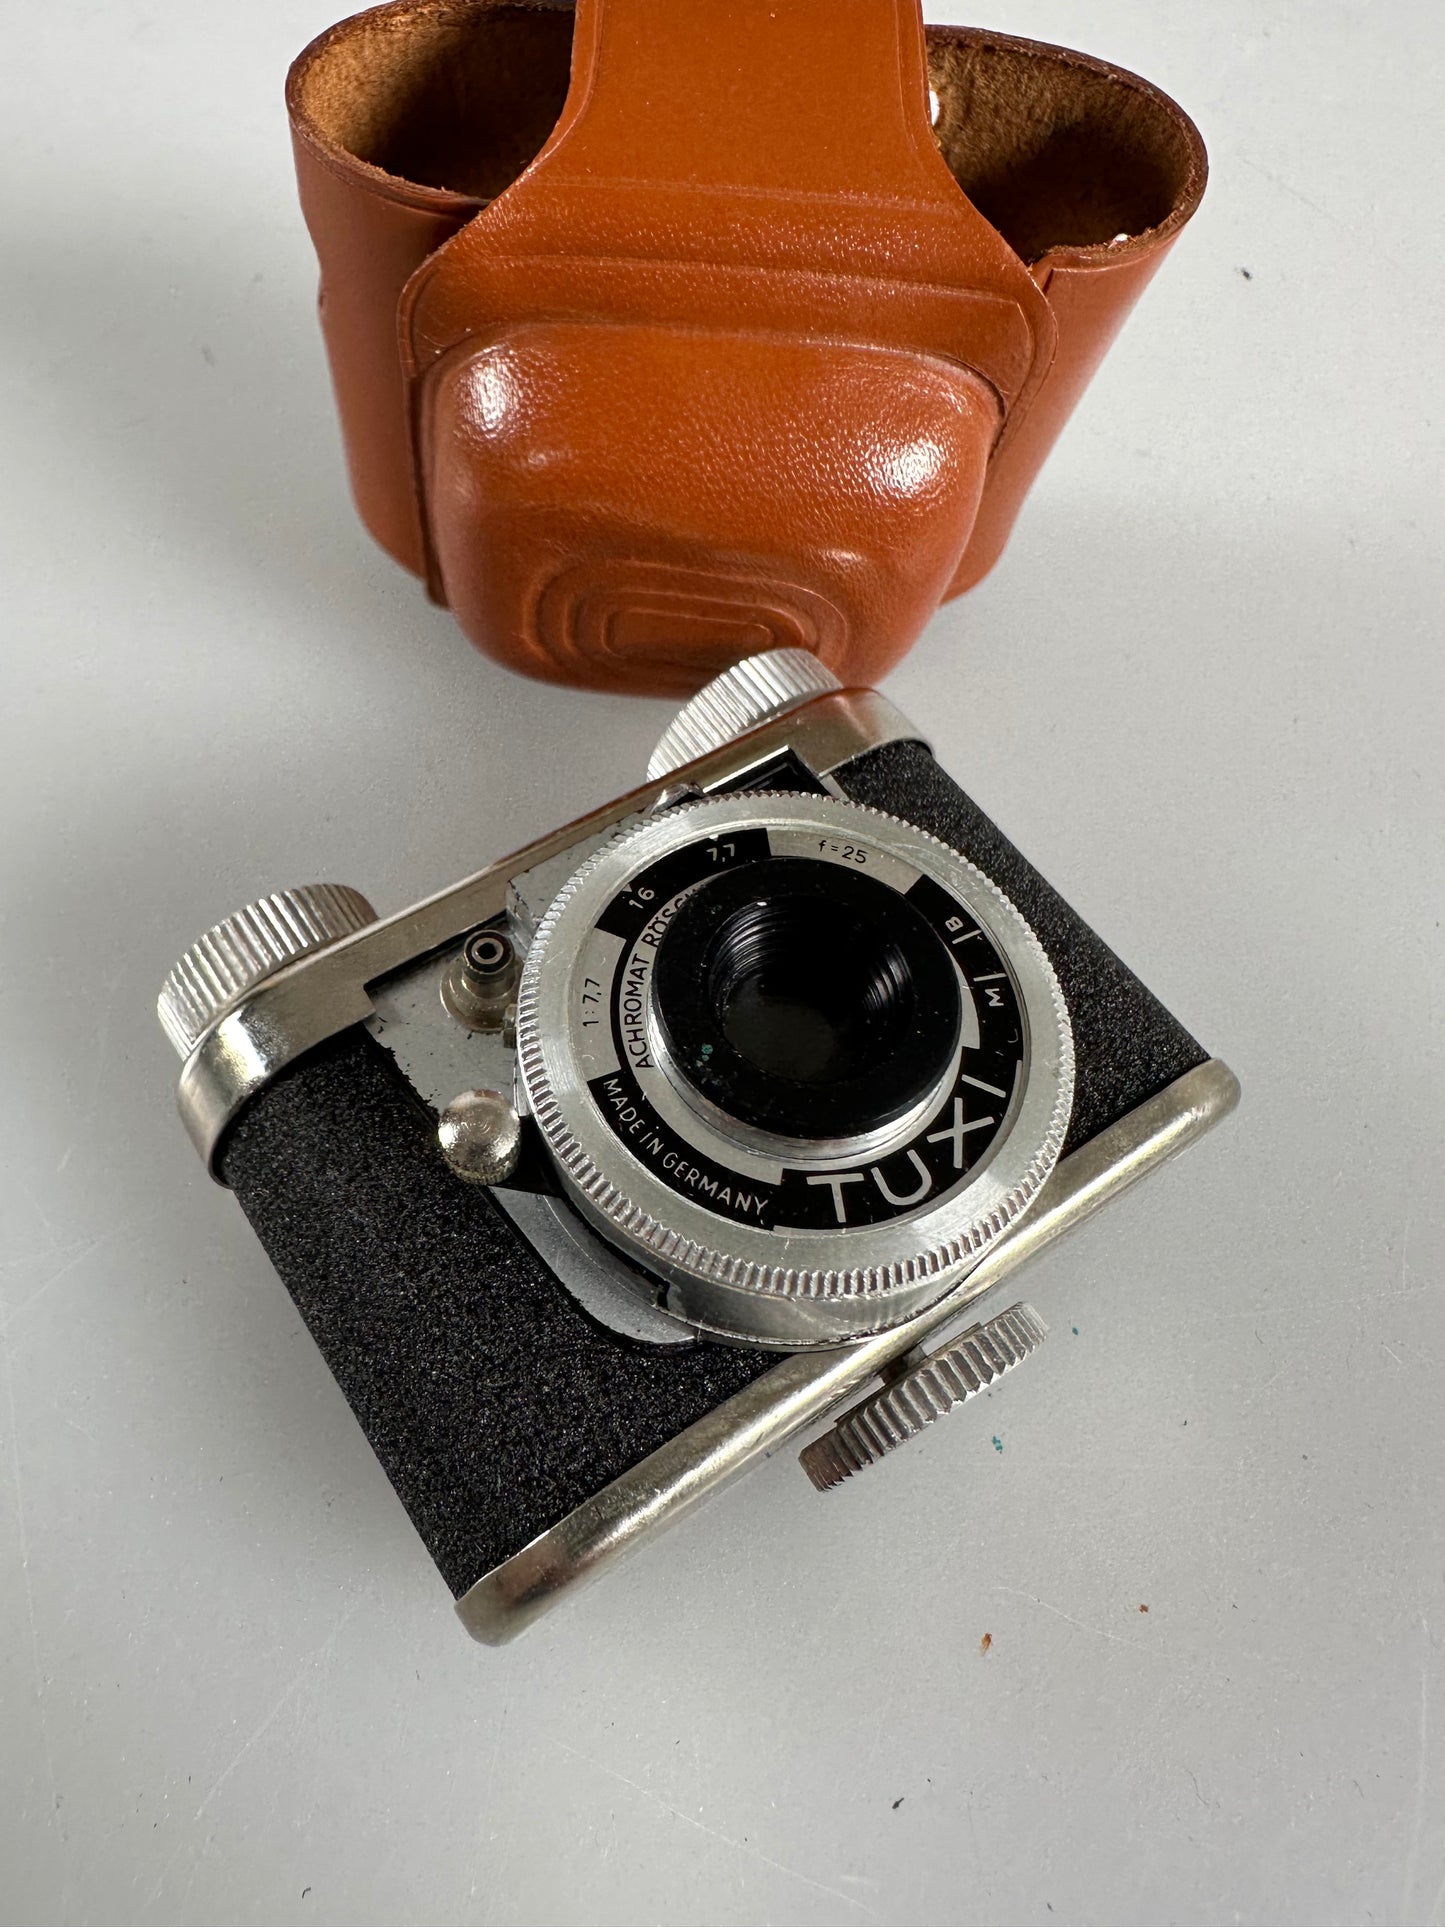 Tuxi Subminiature Camera Schneder 25mm f7.7 achromat Germany w/ Case